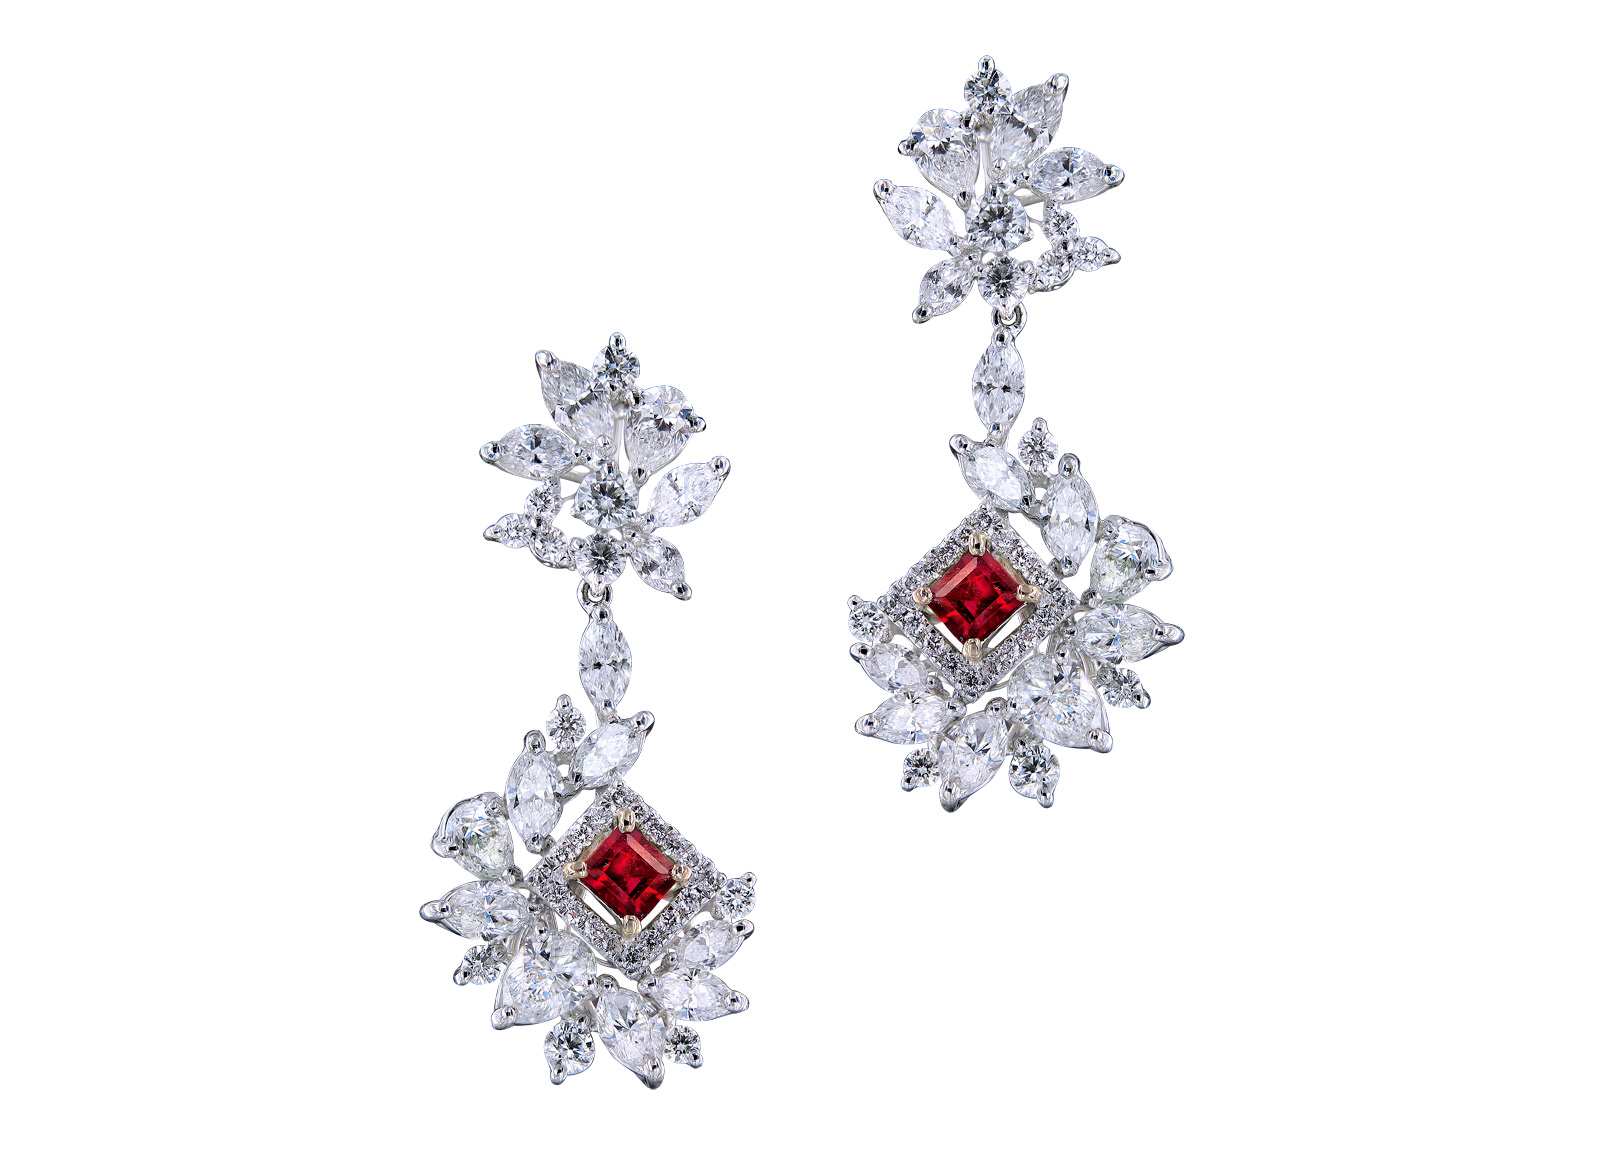 Caratell 0.41ct Bixbite / Red beryl and 4.01ct Diamond drop earrings from 'Sun Ray' collection